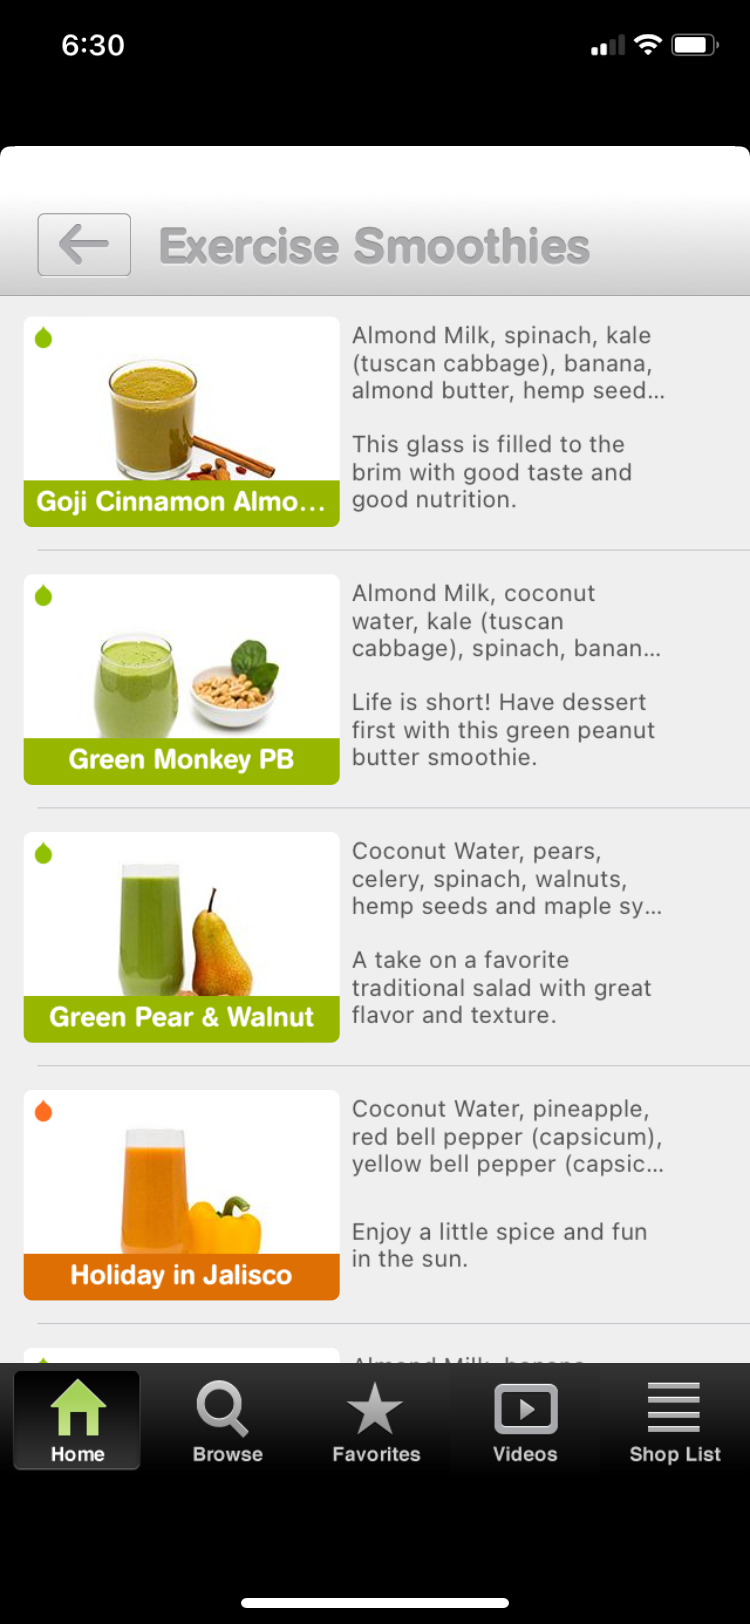 101 Smoothies app screenshot exercise smoothies list